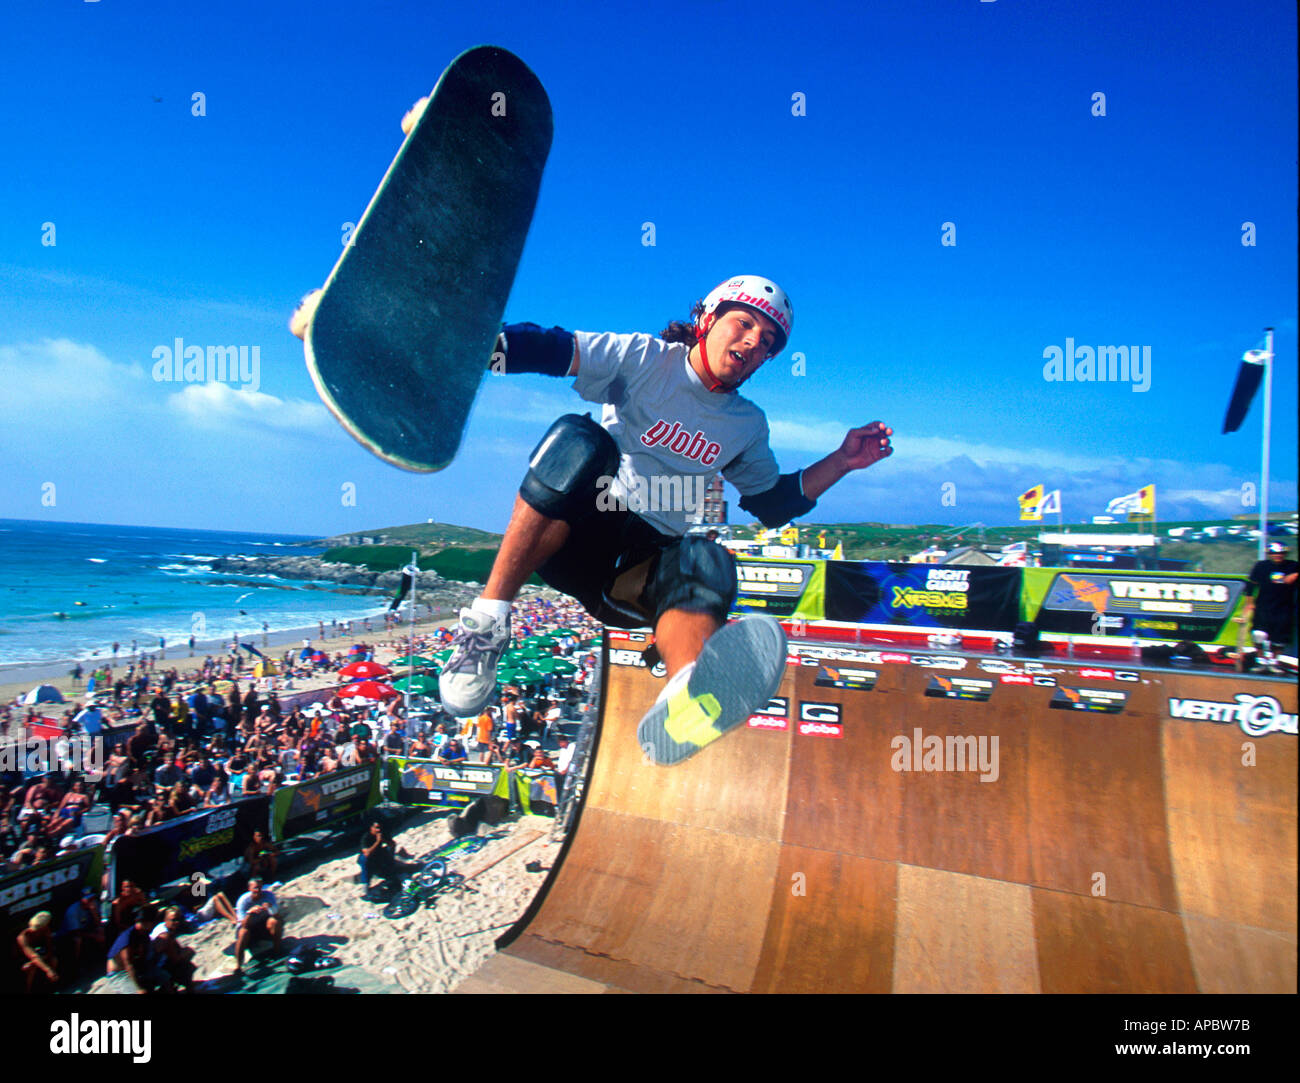 SKATEBOARDING ACTION AT THE RIP CURL BOARD MASTERS Stock Photo - Alamy